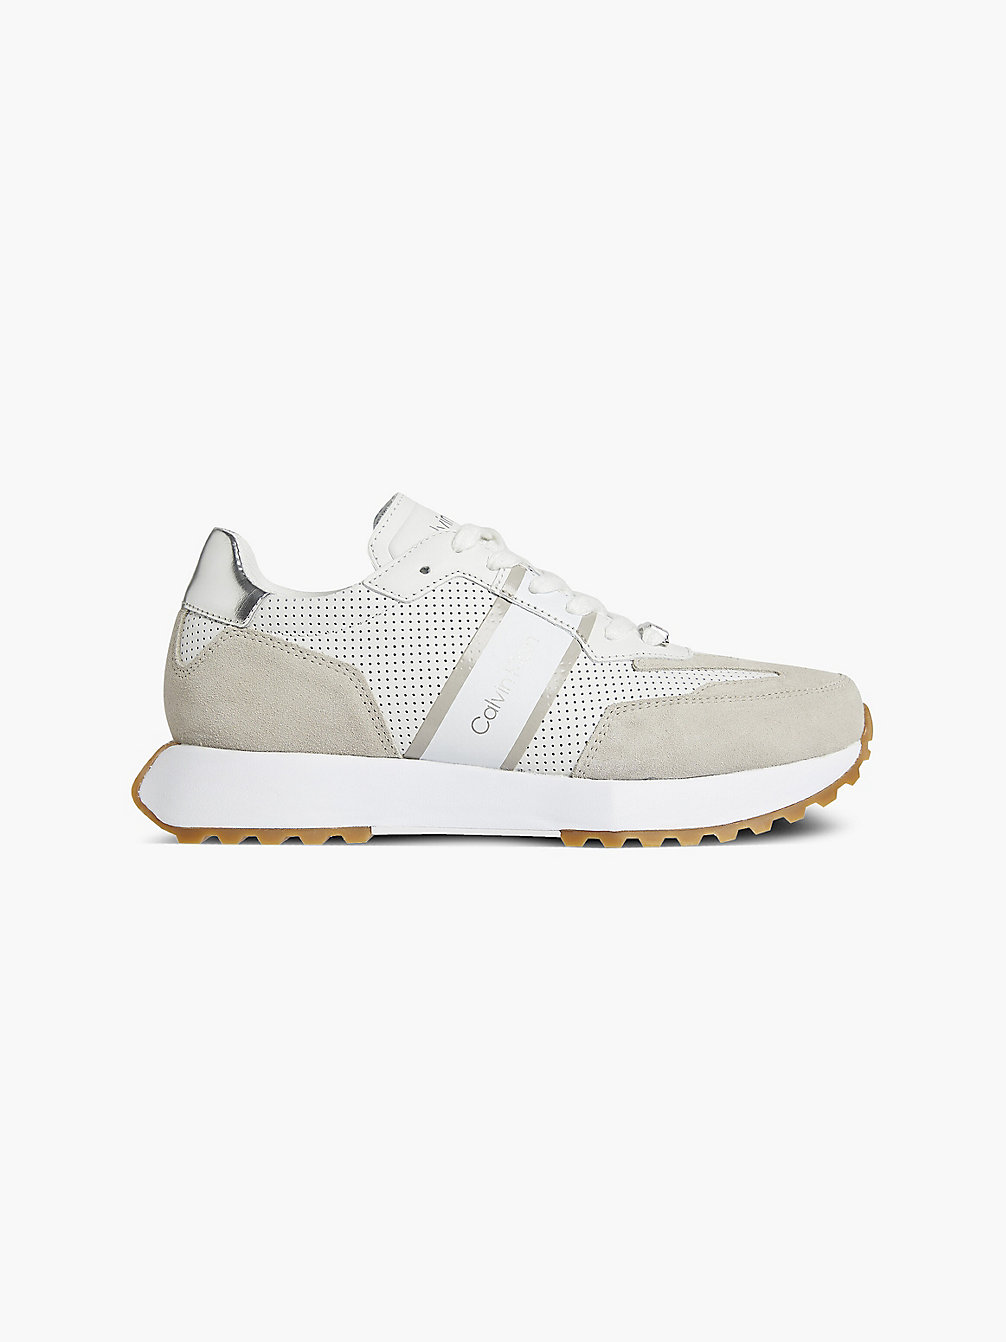 WHITE/SILVER LINING Leather Trainers undefined women Calvin Klein